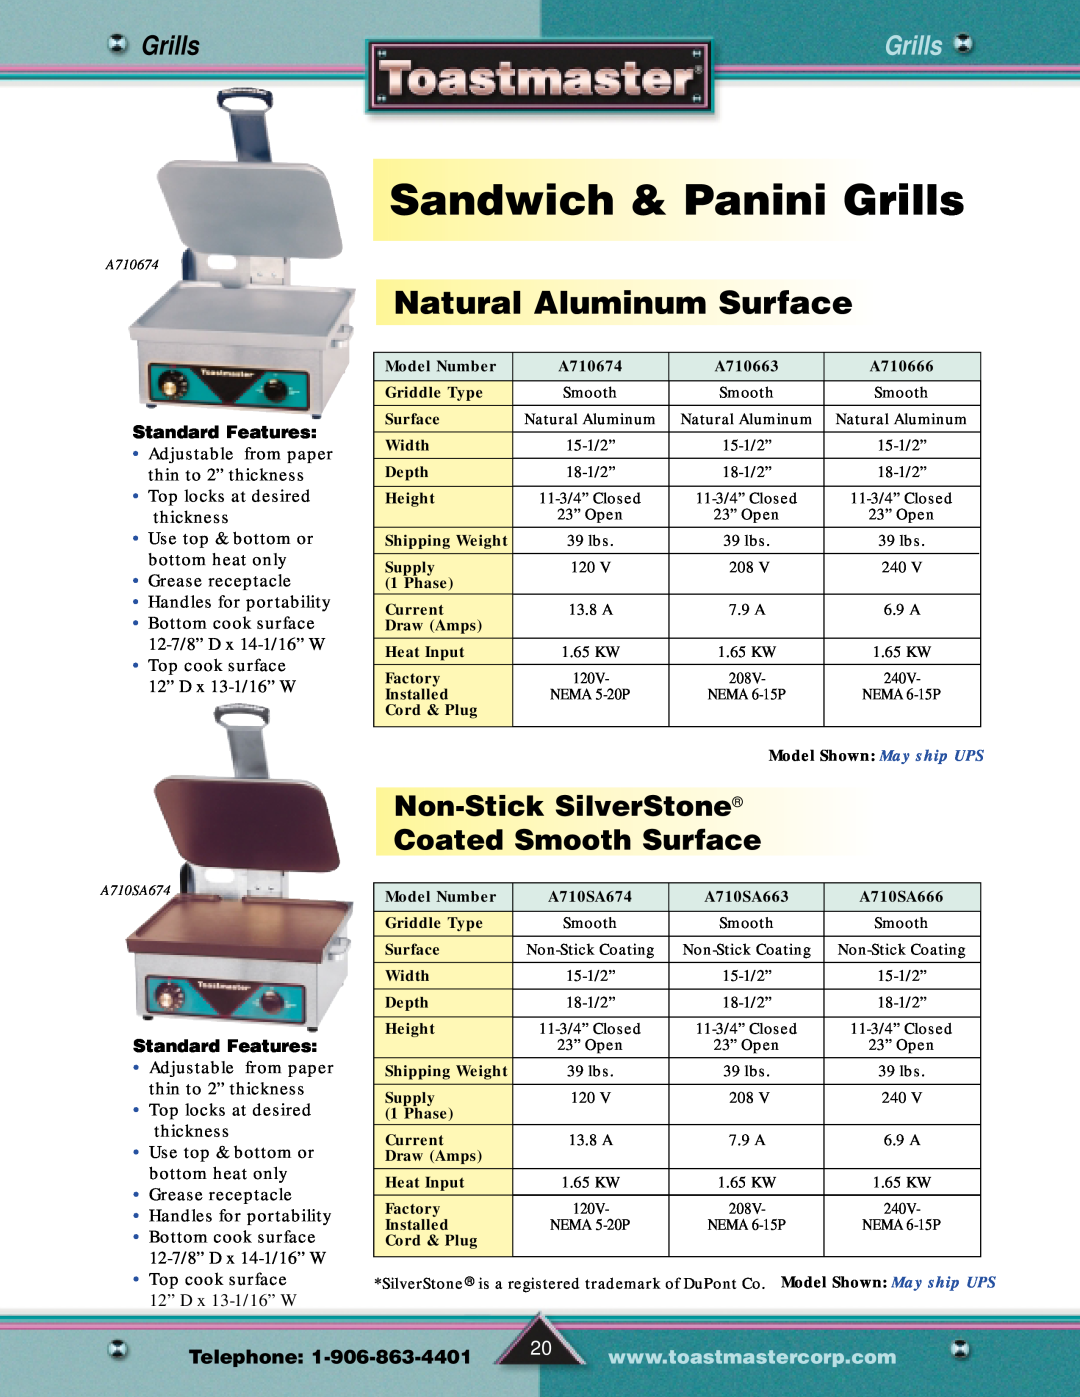 Toastmaster Gas & Electric Fryer Sandwich&PaniniGrills, Non-Stick SilverStone Coated Smooth Surface, Standard Features 